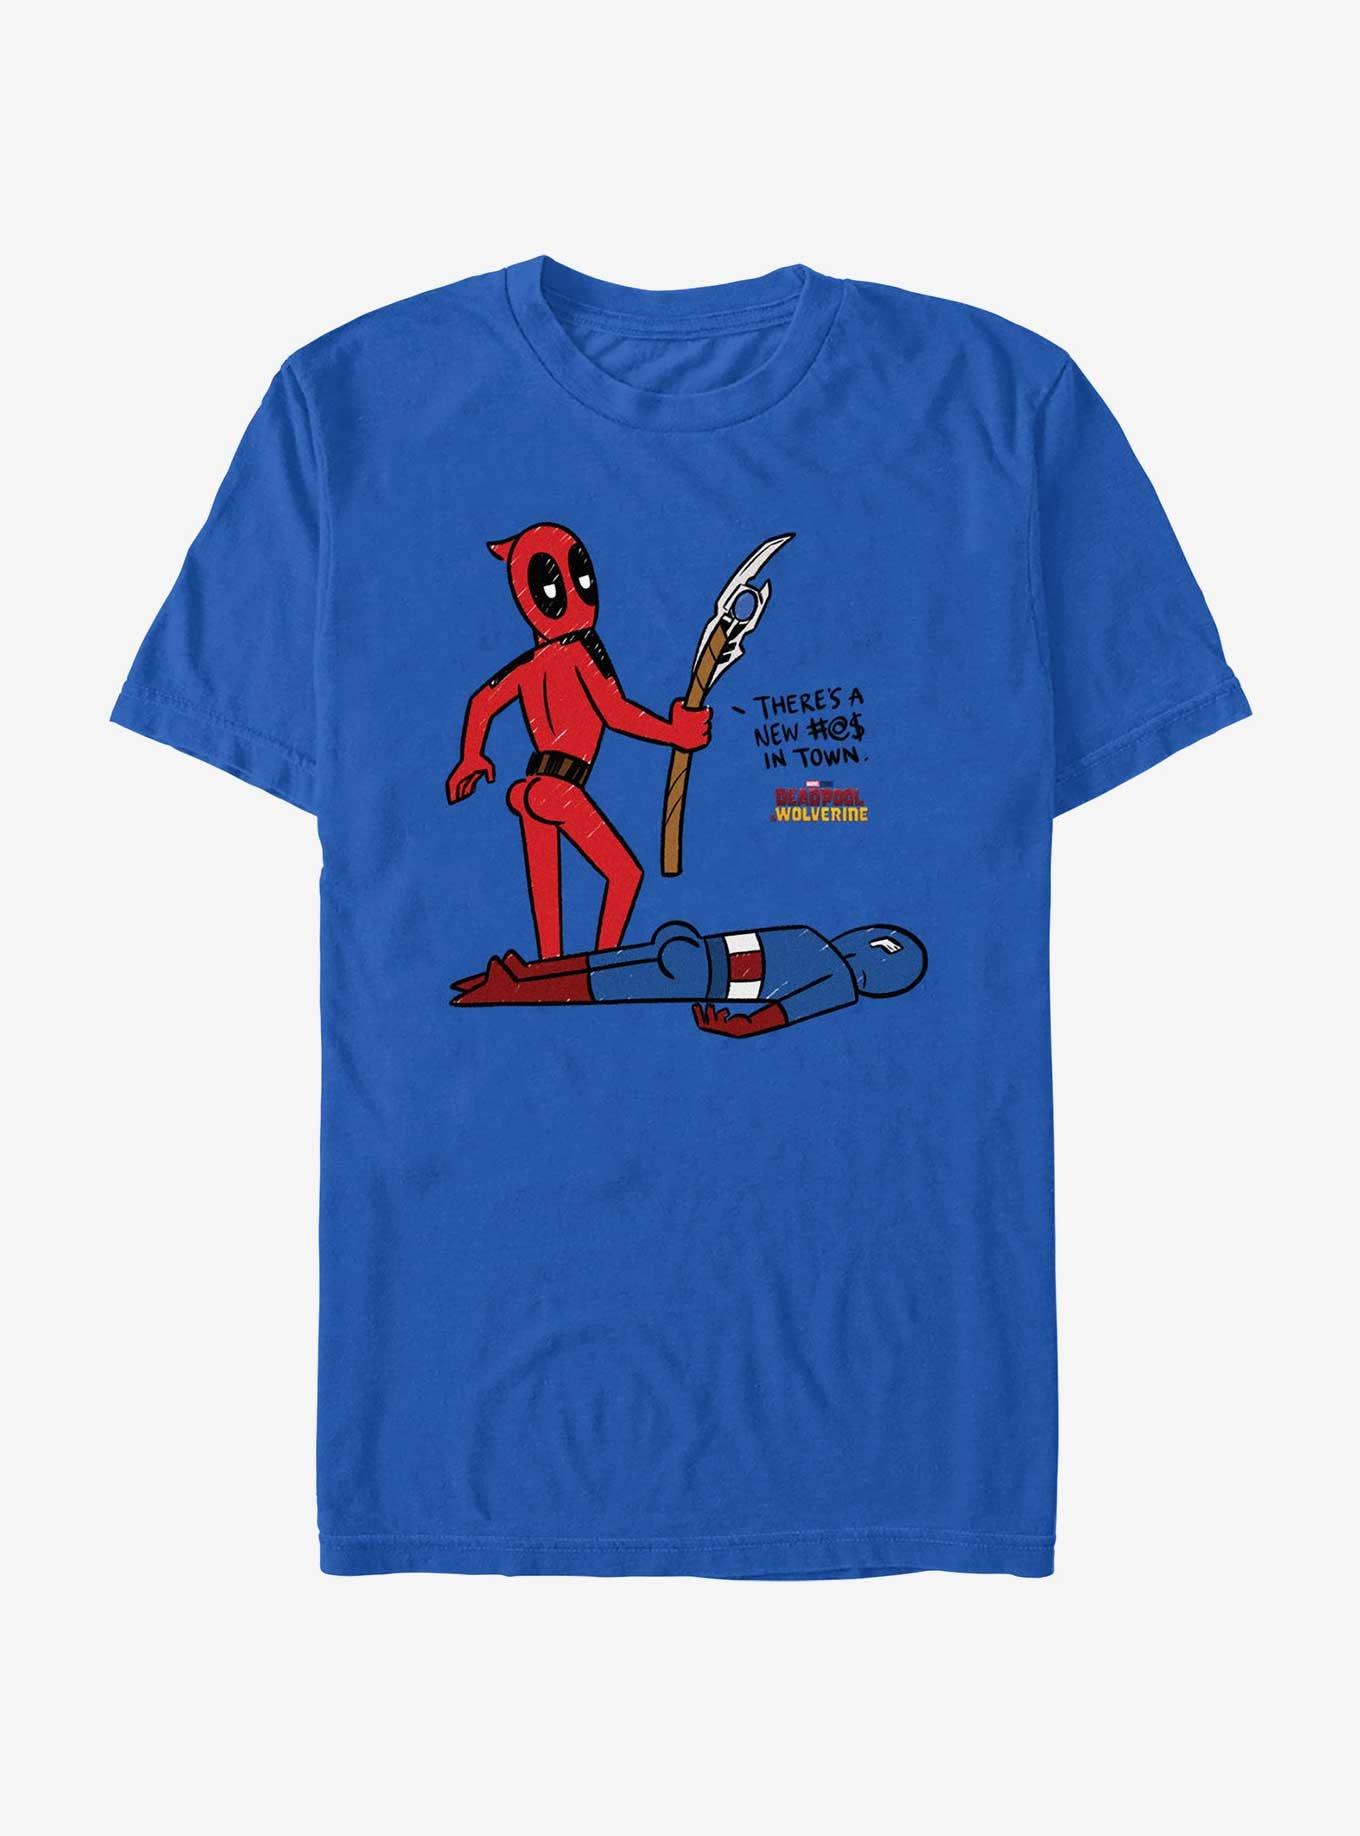 Marvel Deadpool & Wolverine New In Town T-Shirt, ROYAL, hi-res